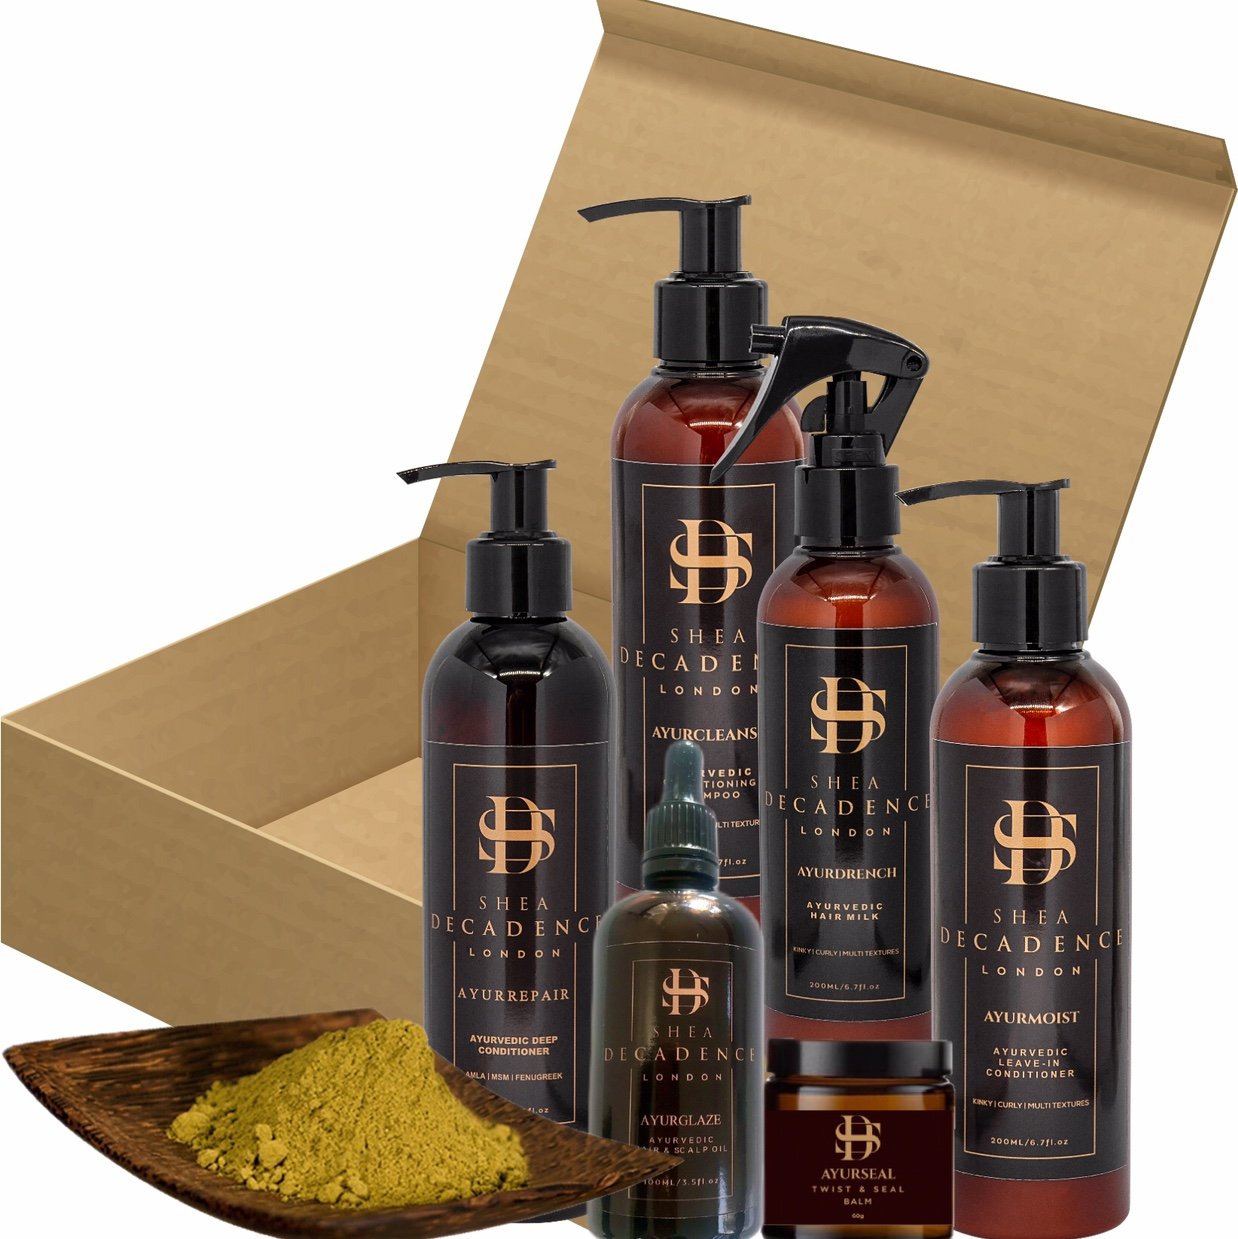 We formulate effective Hair care treatments for the maintenance of kinky, curly & Multi textured hair, handmade in the UK